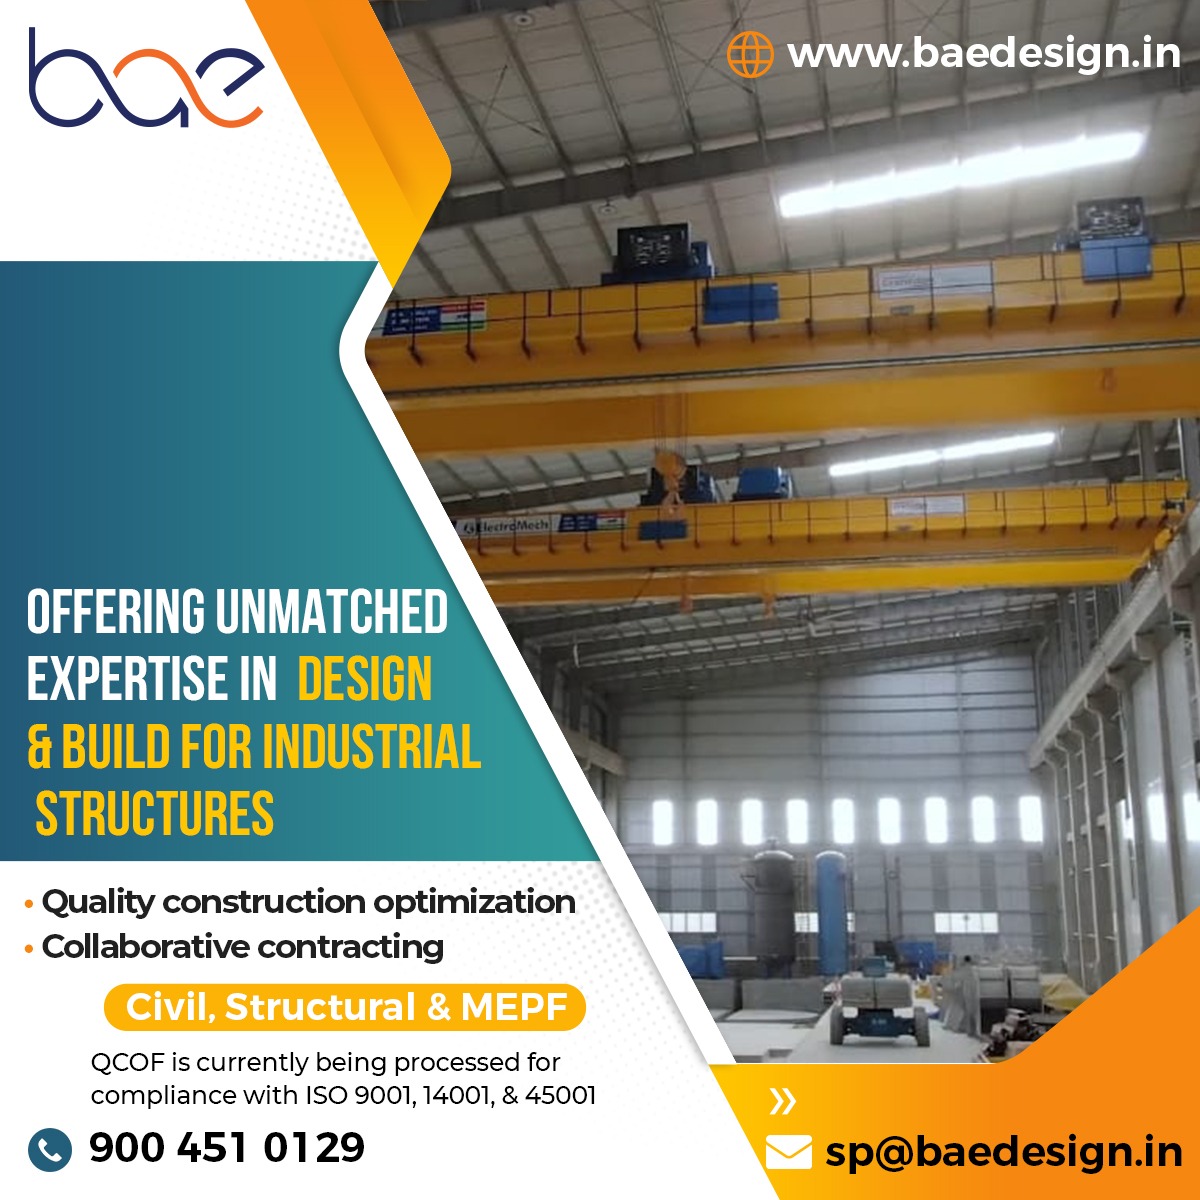 #BAE has pioneered the arena of design-build and construction services for industrial requirements, by offering unmatched expertise in #building factories and other facilities across the Southern states of India. We always aim to generate optimum benefits

#design #Architecture https://t.co/kRCMPe9OxZ